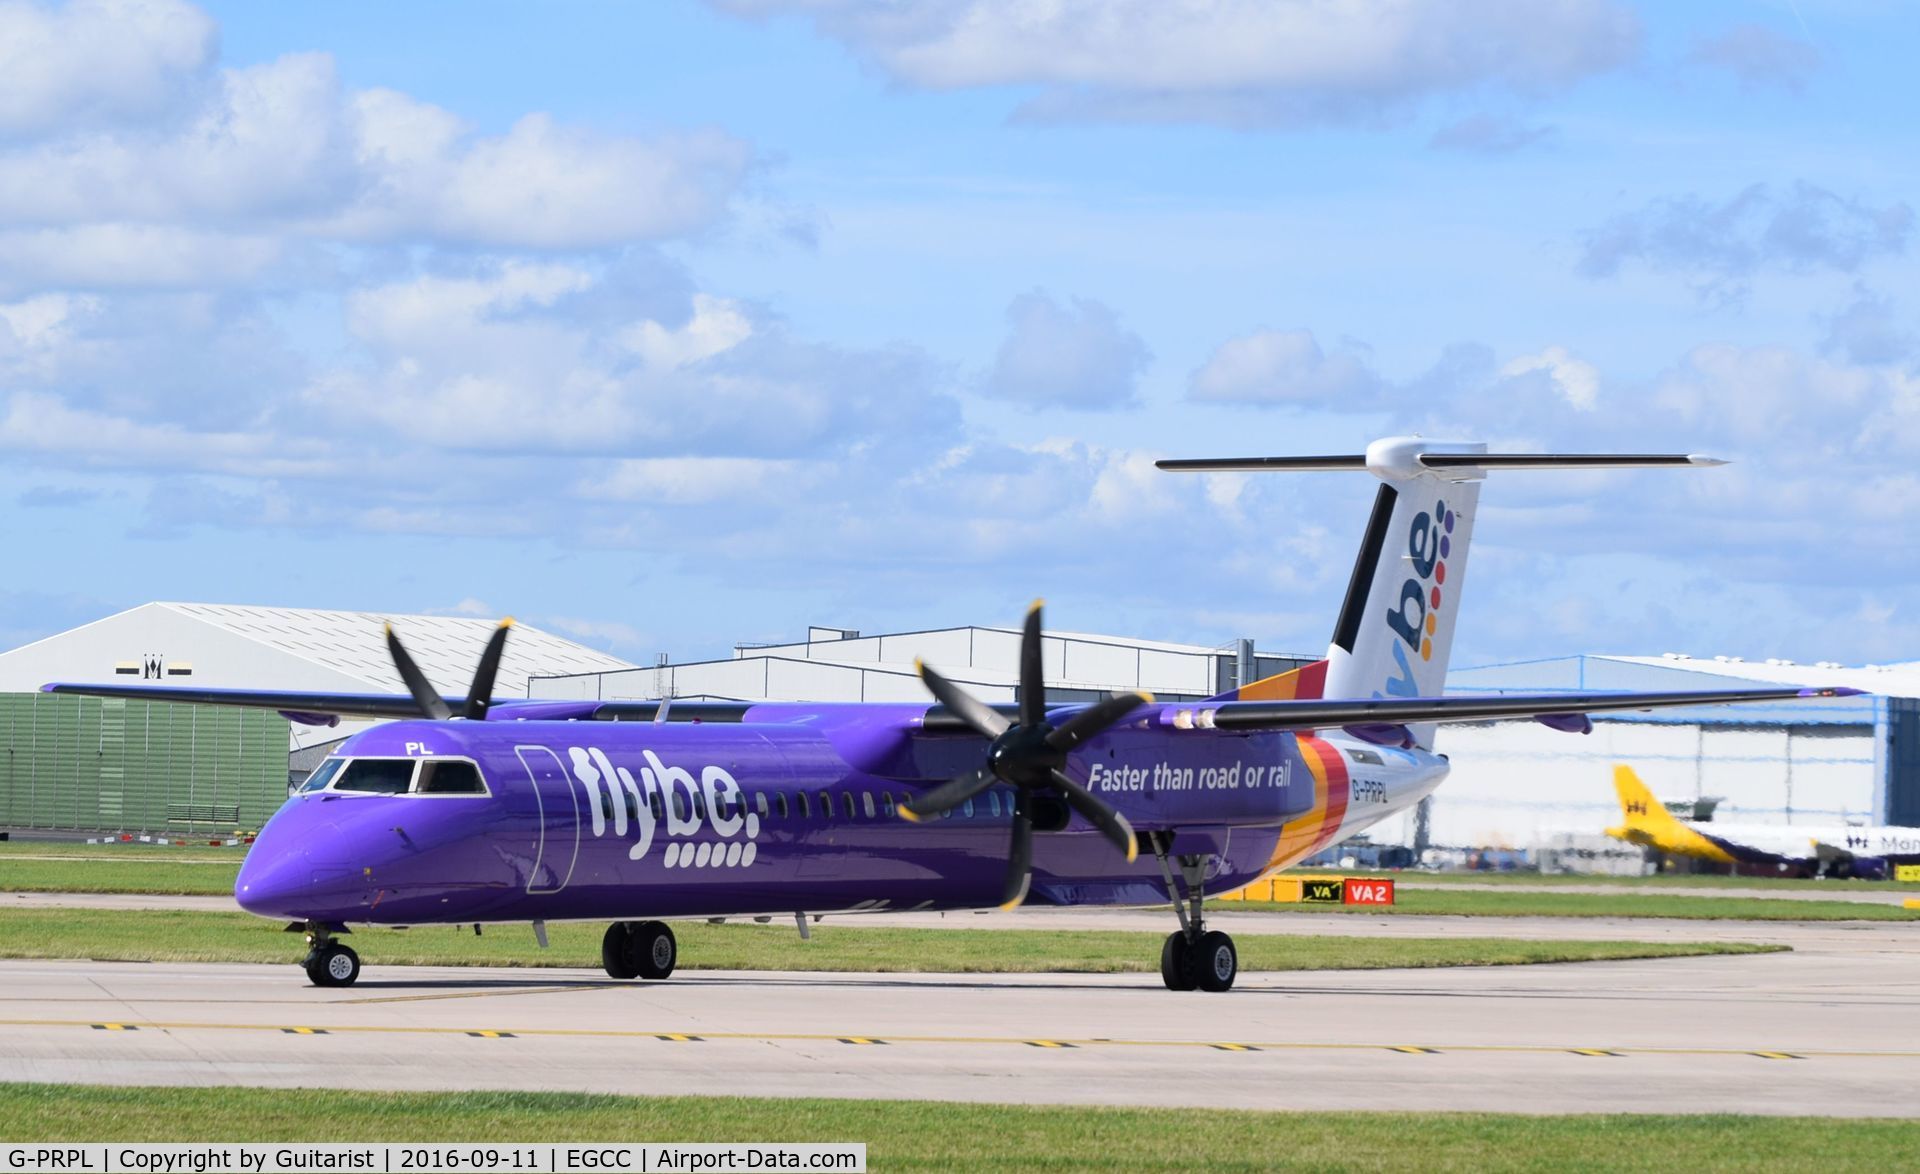 G-PRPL, 2011 Bombardier DHC-8-402 Dash 8 C/N 4380, At Manchester